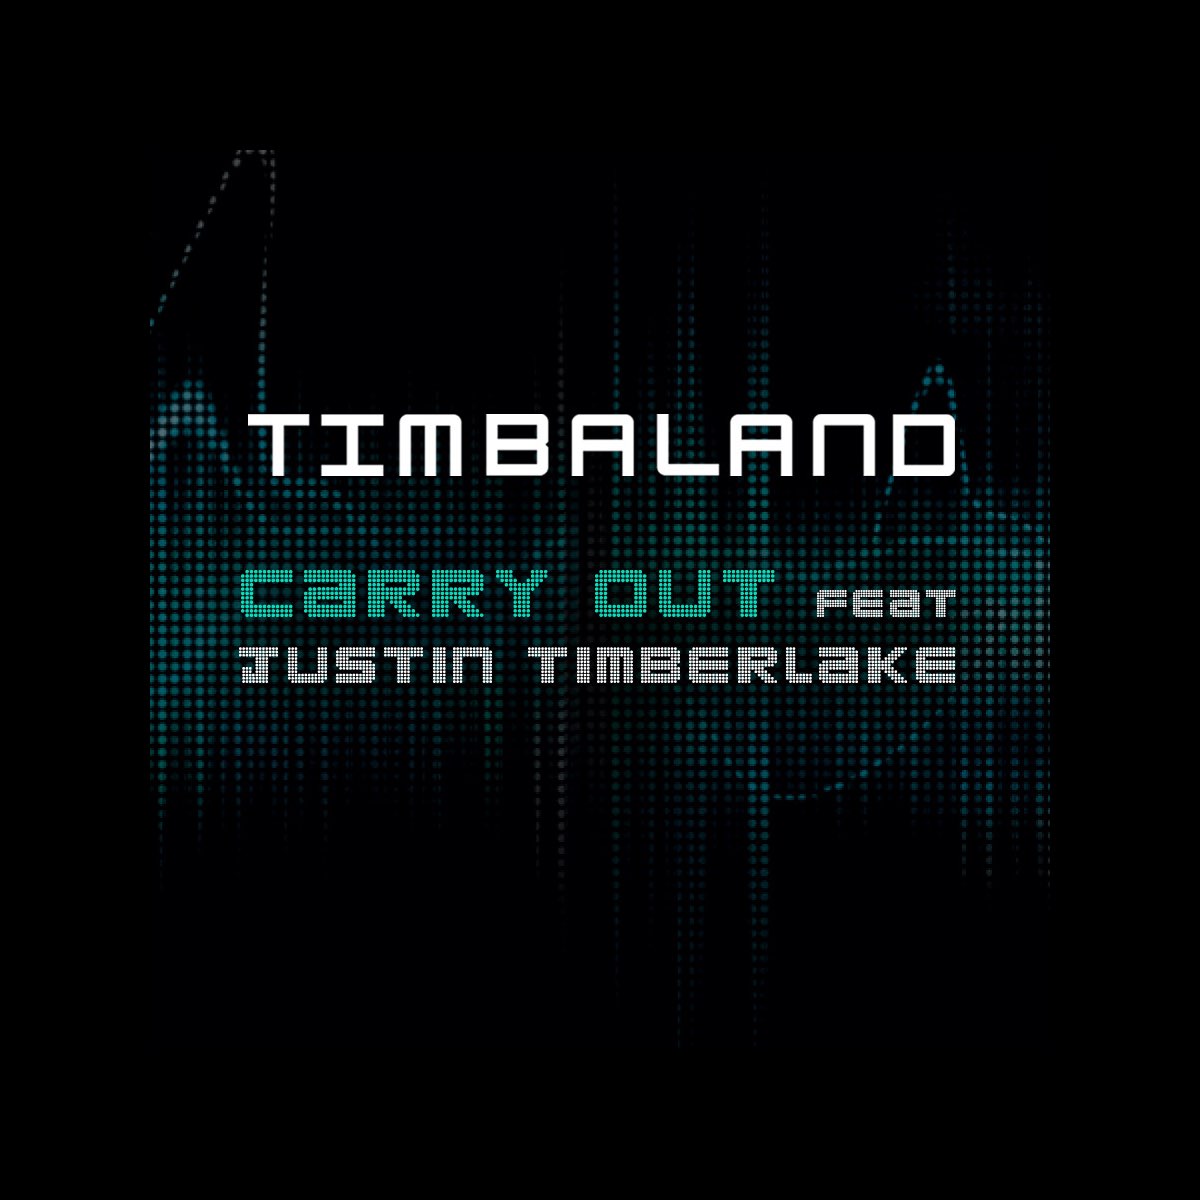 Timbaland ft. featuring Justin Timberlake Carry Out cover artwork